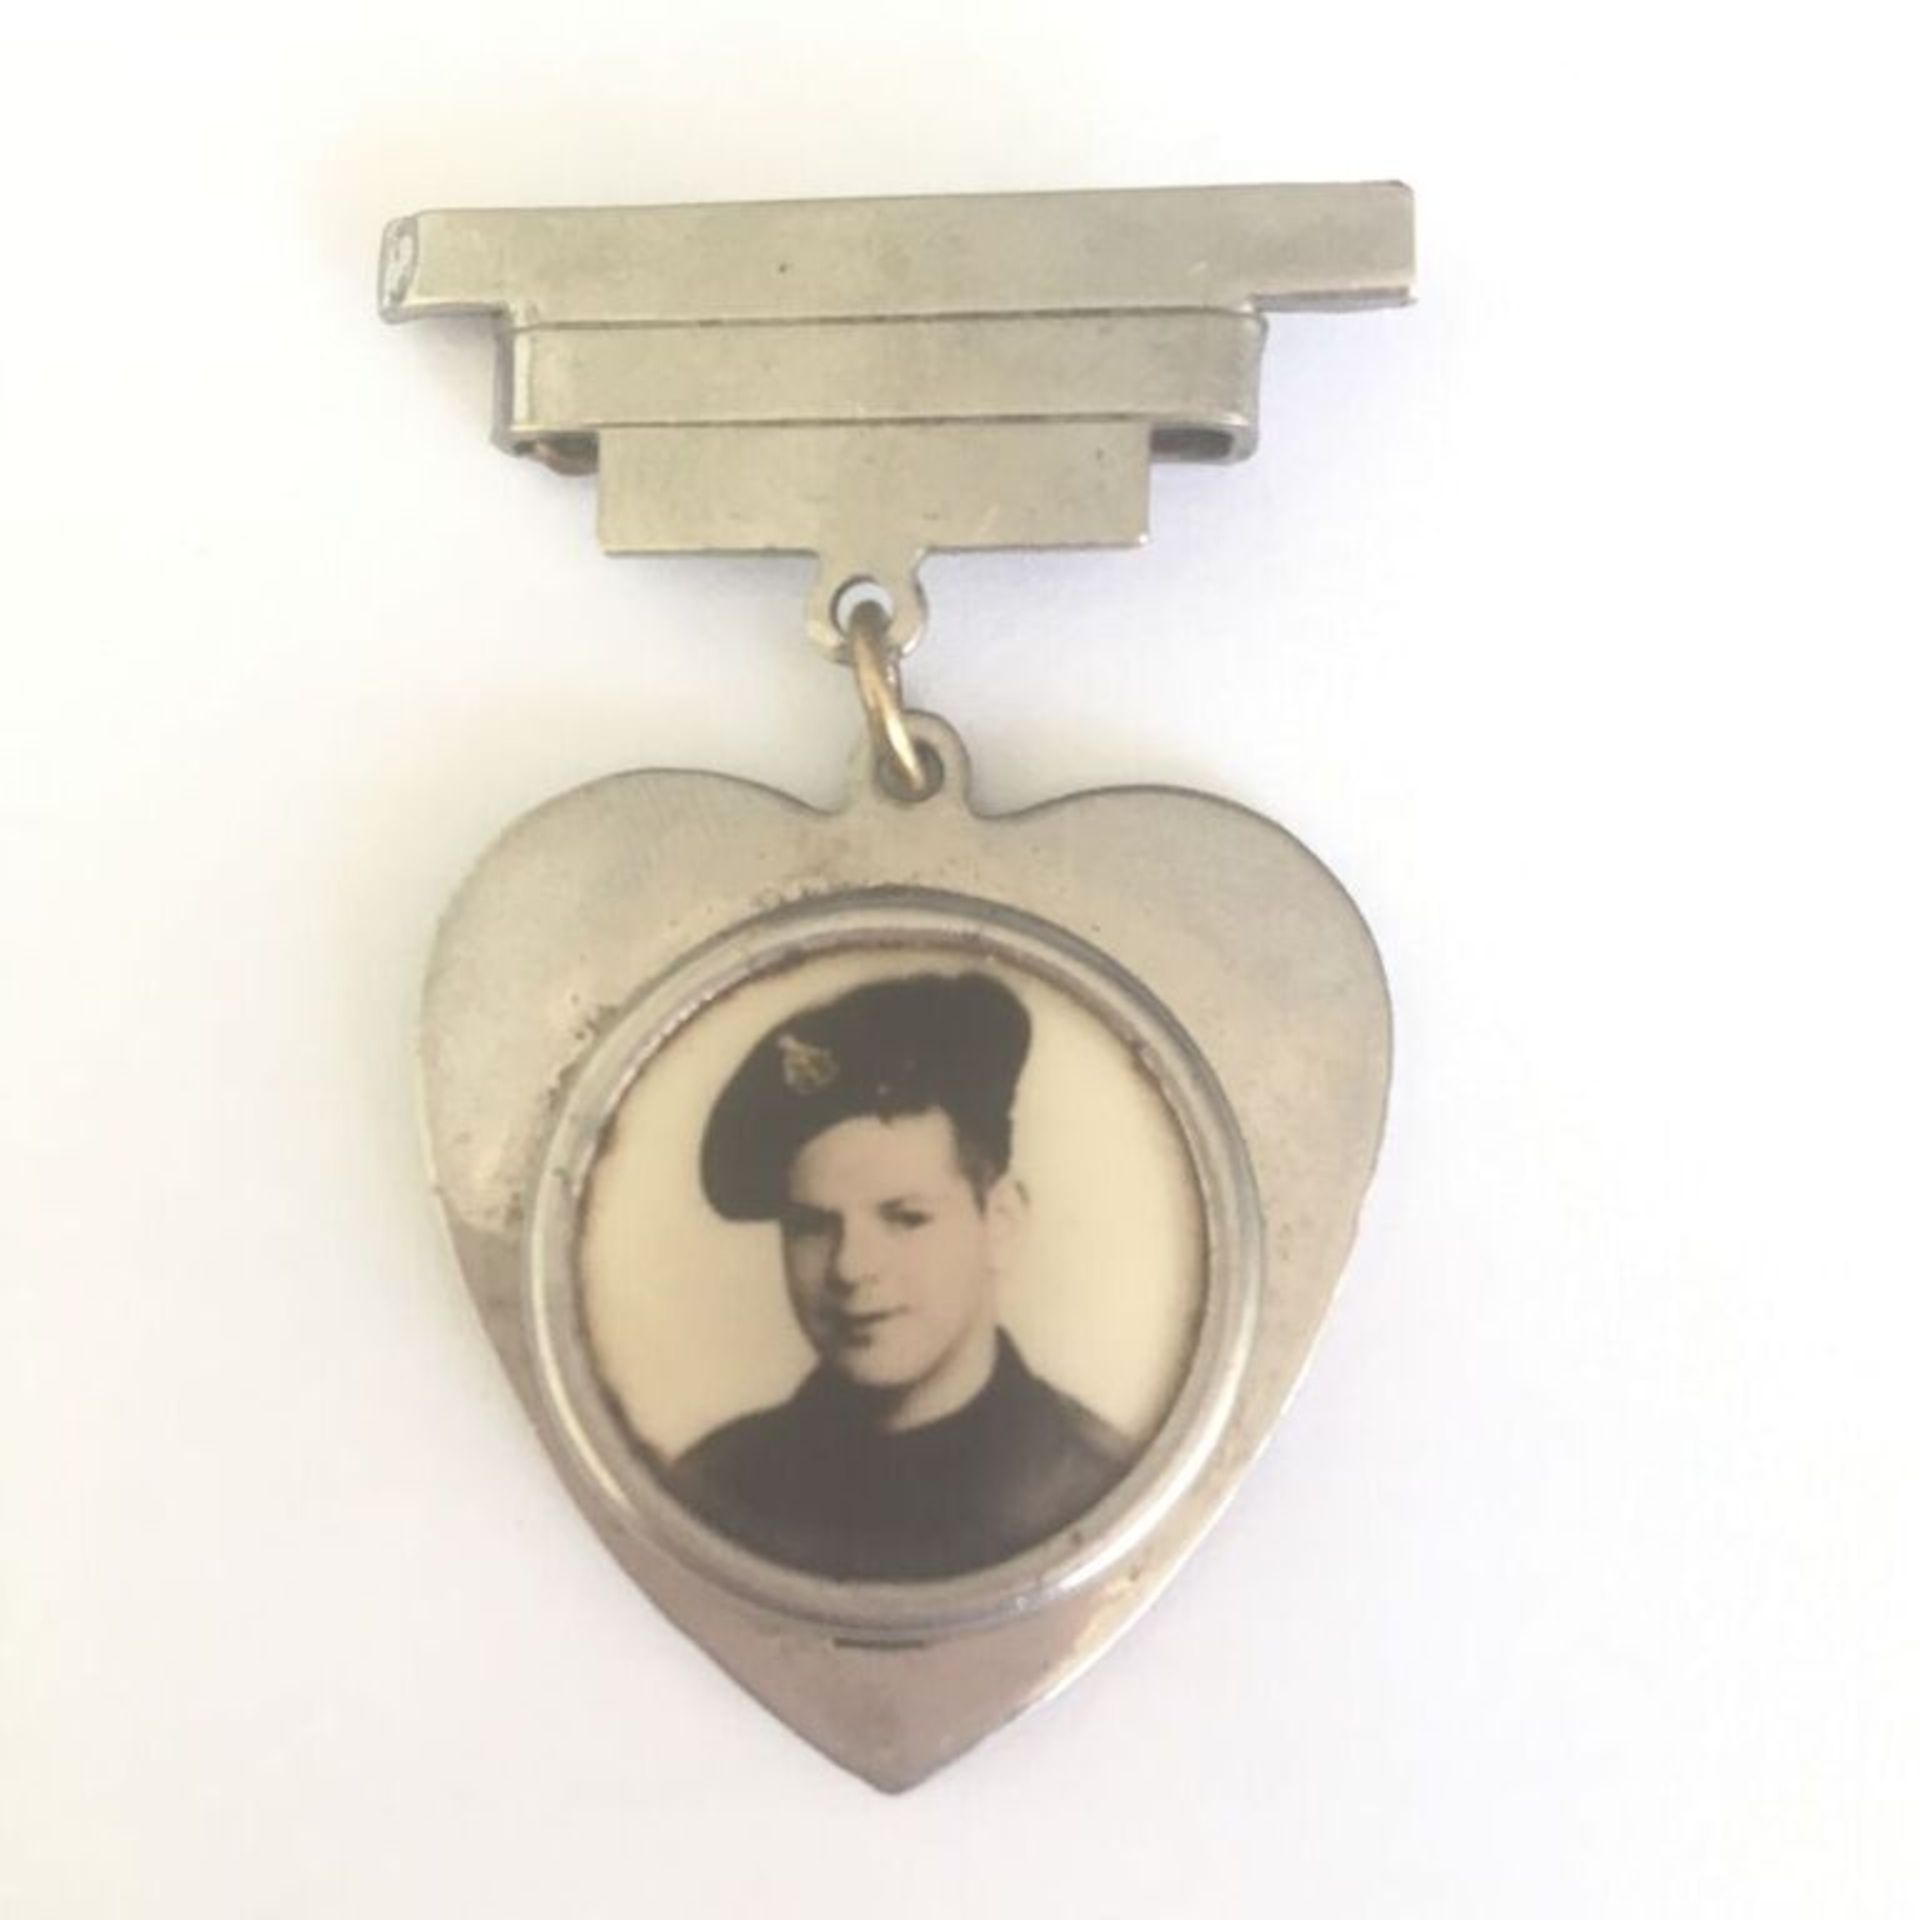 A WW2 ART DECO HEART SHAPED PORTRAIT BROOCH WITH PHOTOGRAPH OF VERY YOUNG SOLDIER